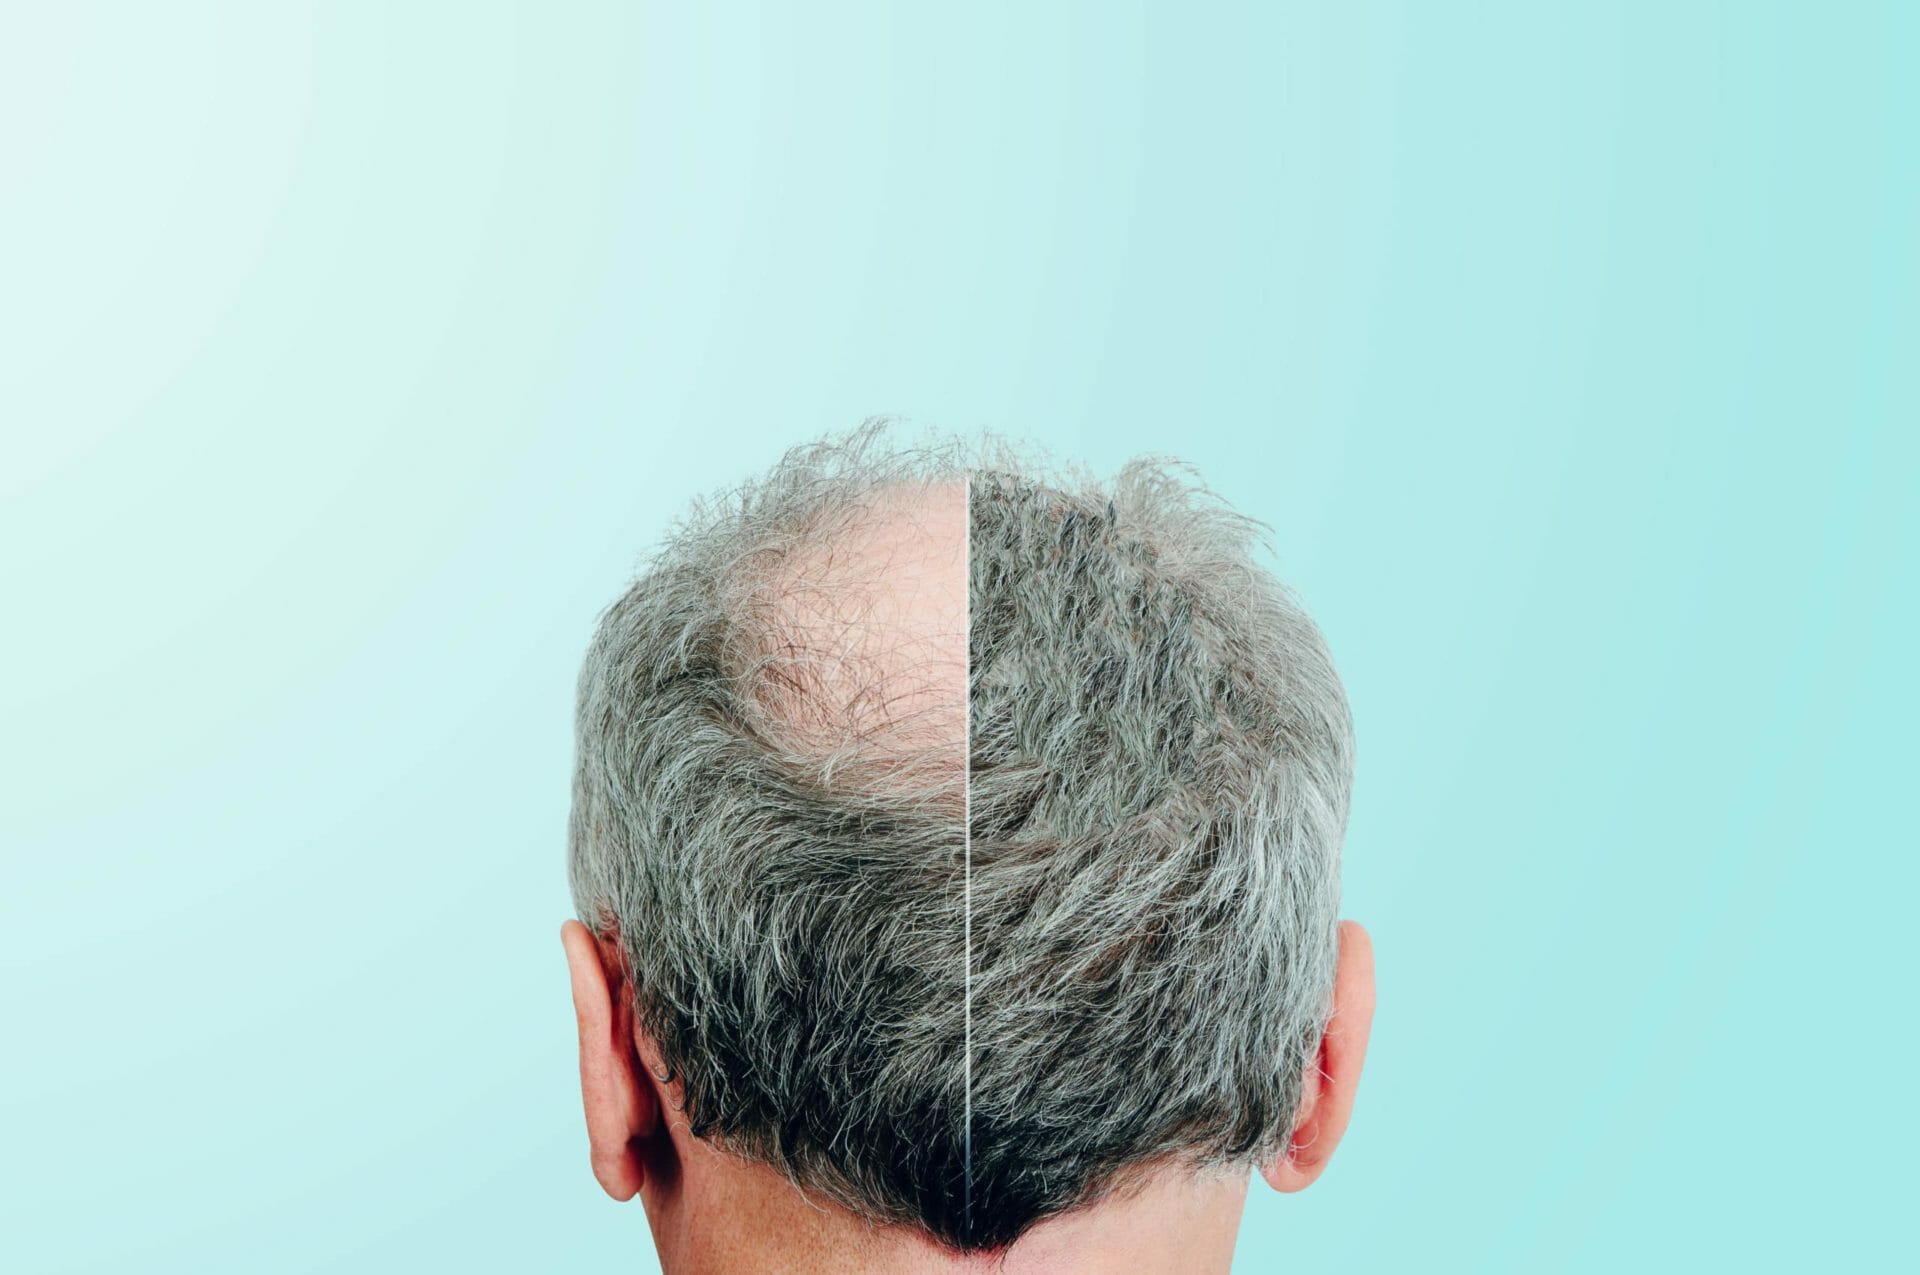 Before and after, Rear view of a male head without hair. Hair loss concept, bird's nest on the head. Problems with hair regrowth, shampoo for facial hair growth.